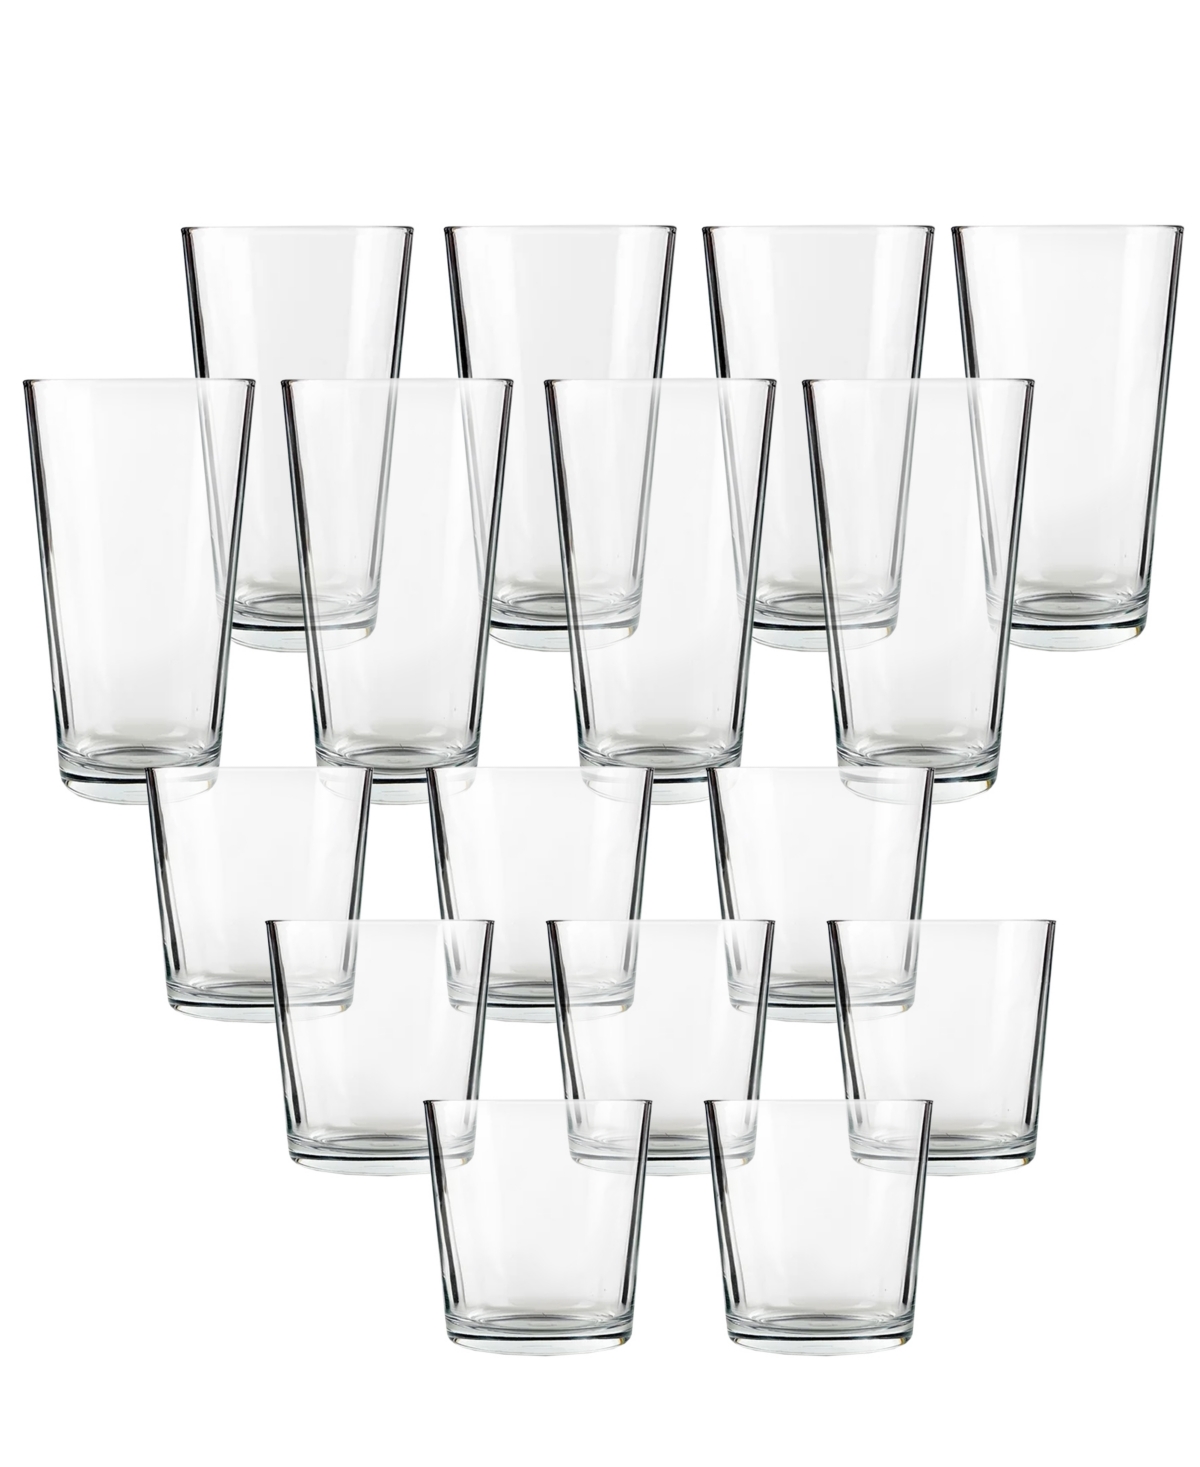 Circleware Simple Home 16 Pc Entertaining Set In Clear